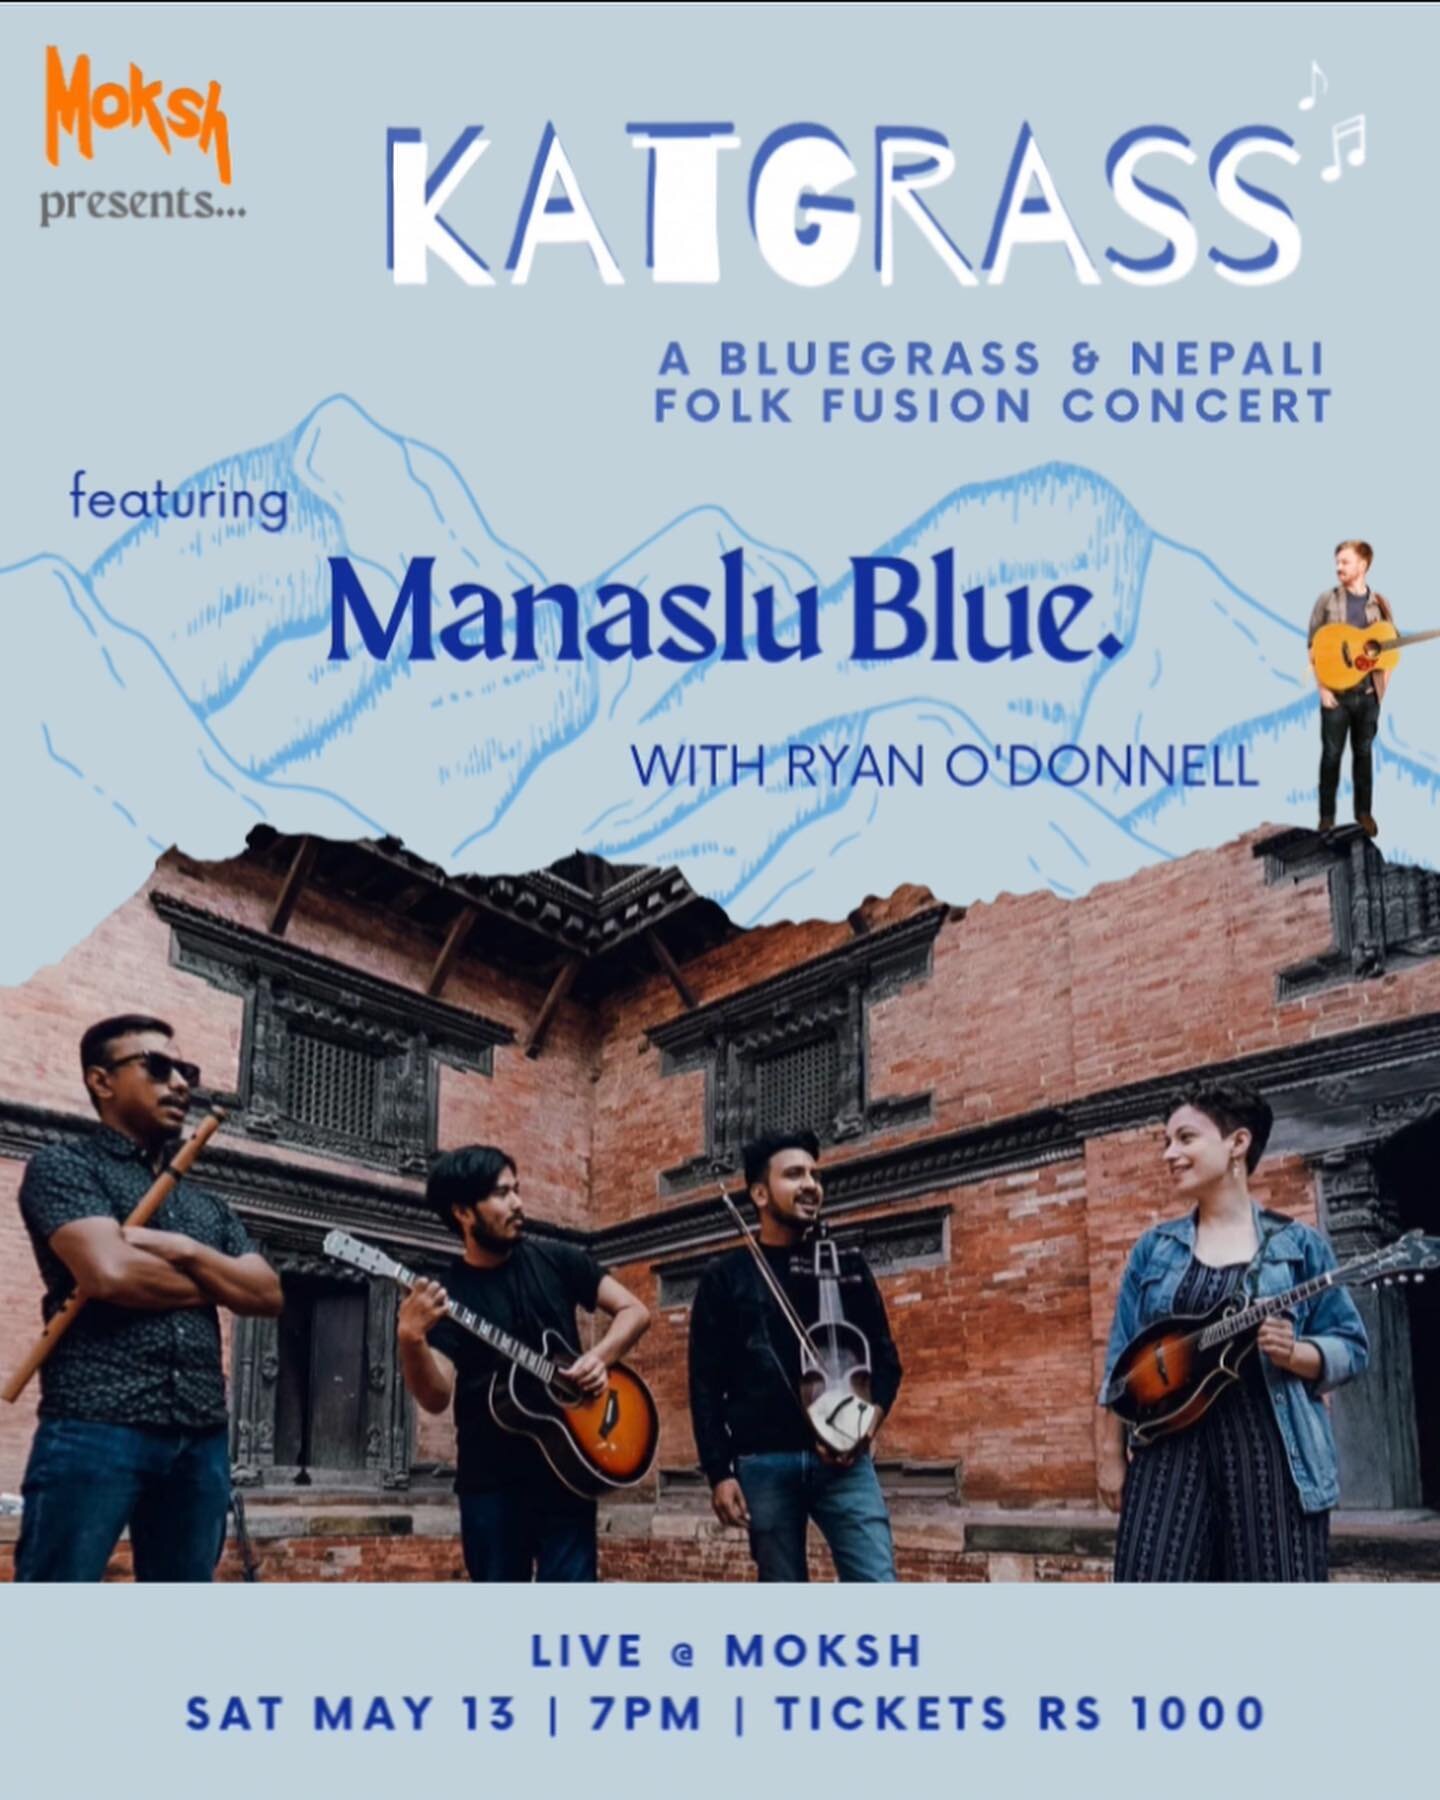 So excited to debut at @moksh_live tonight at 7 with @manaslu.blue. If you&rsquo;re in the area please do come by its gonna be a super special show. @_ryanod_ and I are playing a bluegrass duo set to open up the show! Swipe for some bops ~
Tickets ar